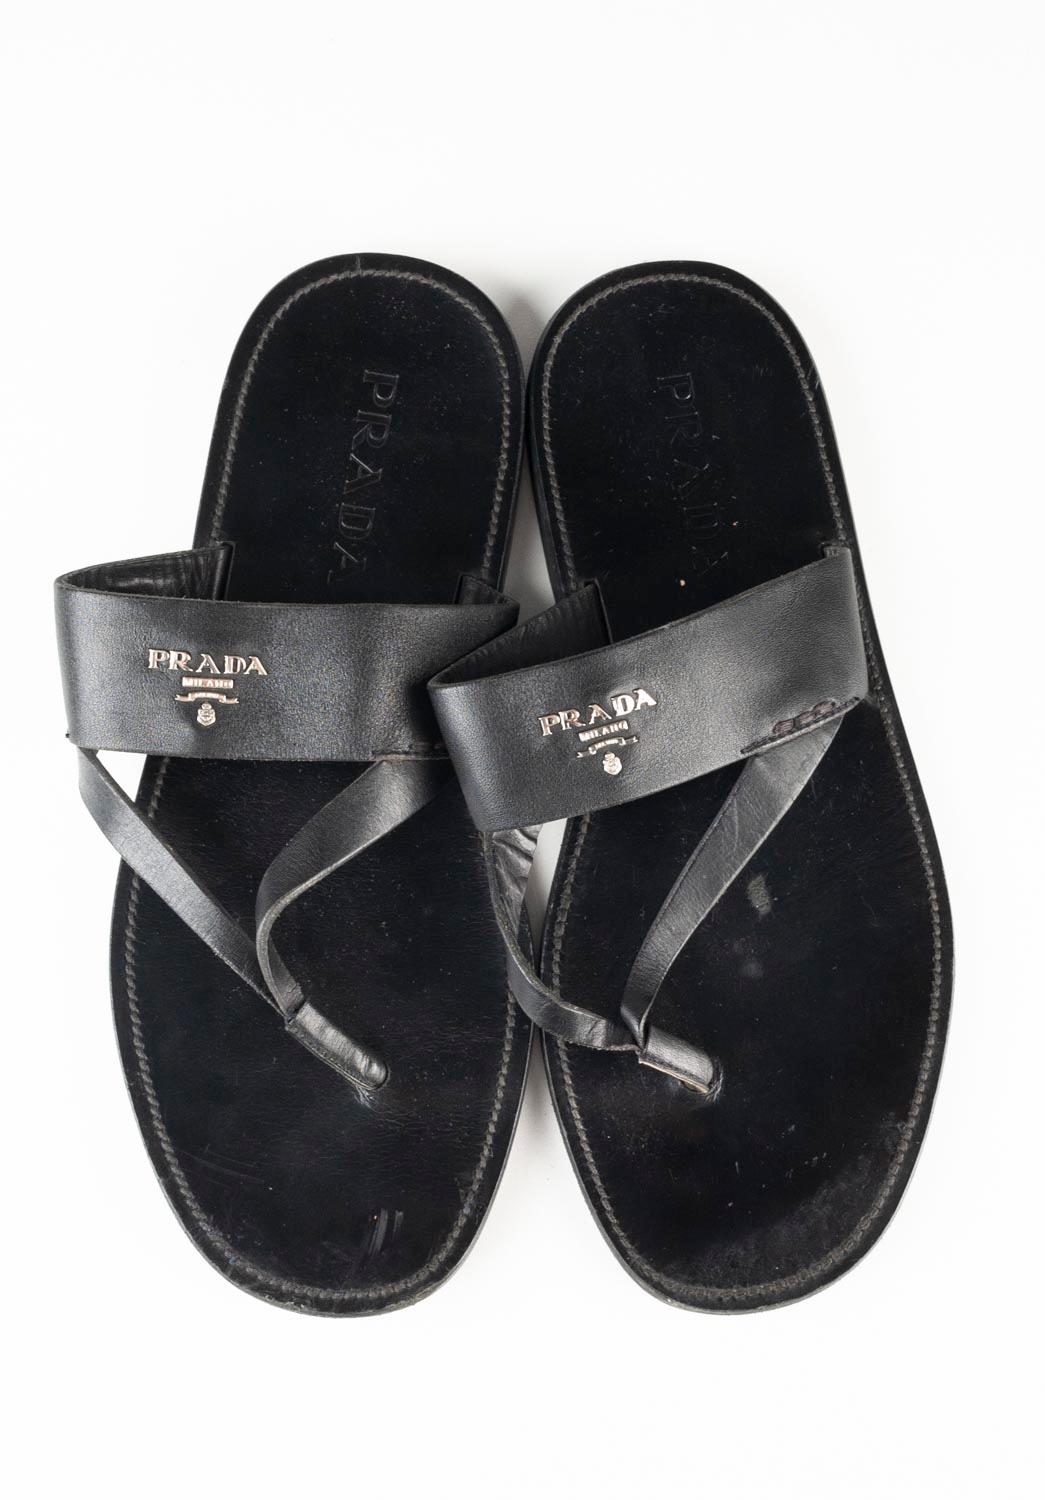 Prada Slippers Leather Sandals Men Shoes Size UK7 EUR41, USA 8, S614 In Excellent Condition For Sale In Kaunas, LT